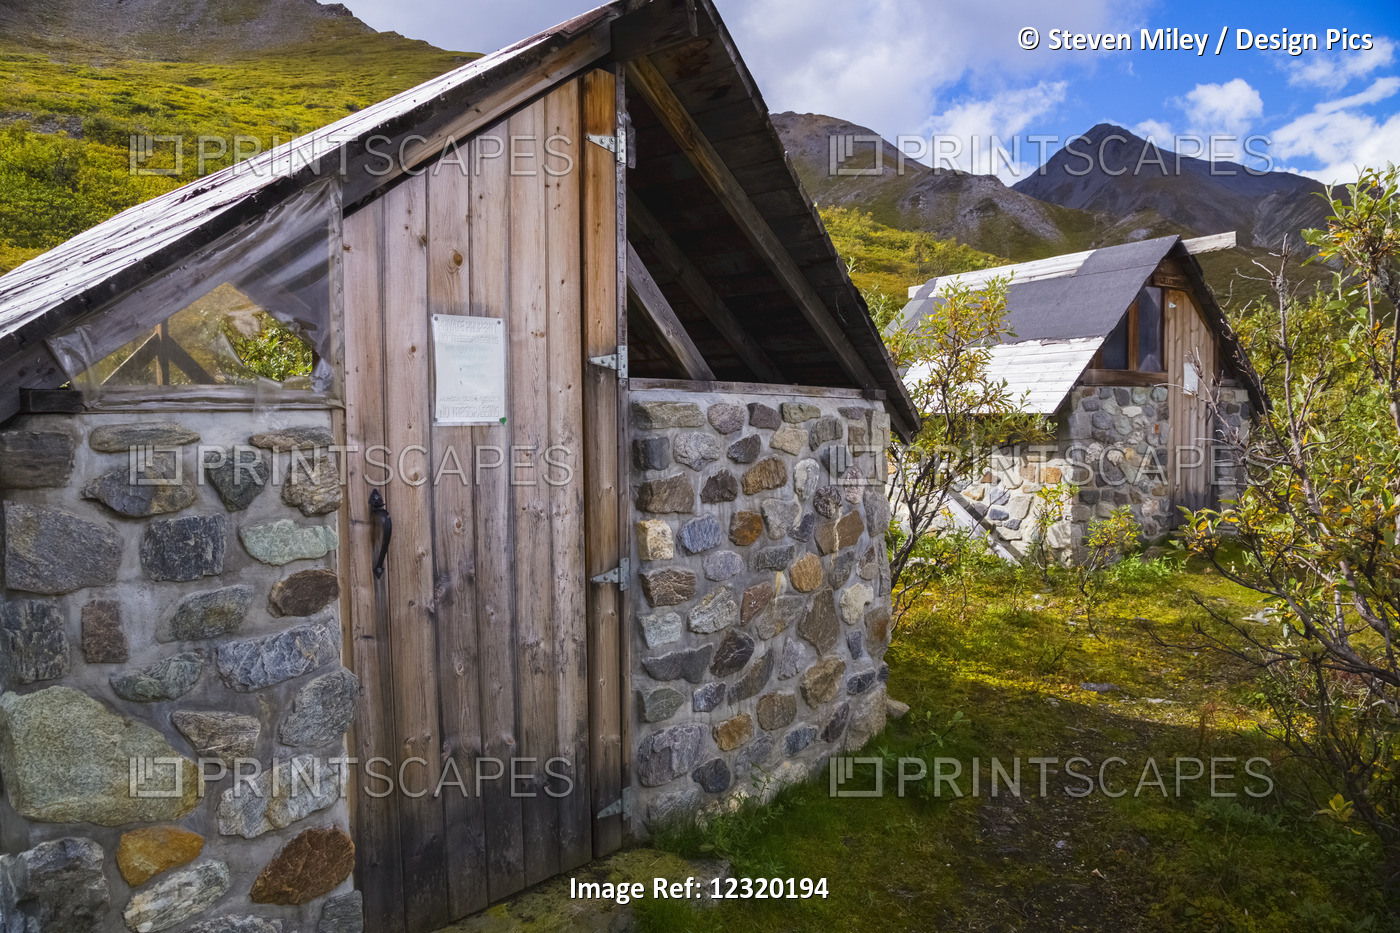 Deteriorating Hunting Cabins In A Remote Area Of The Alaska Range Near The ...